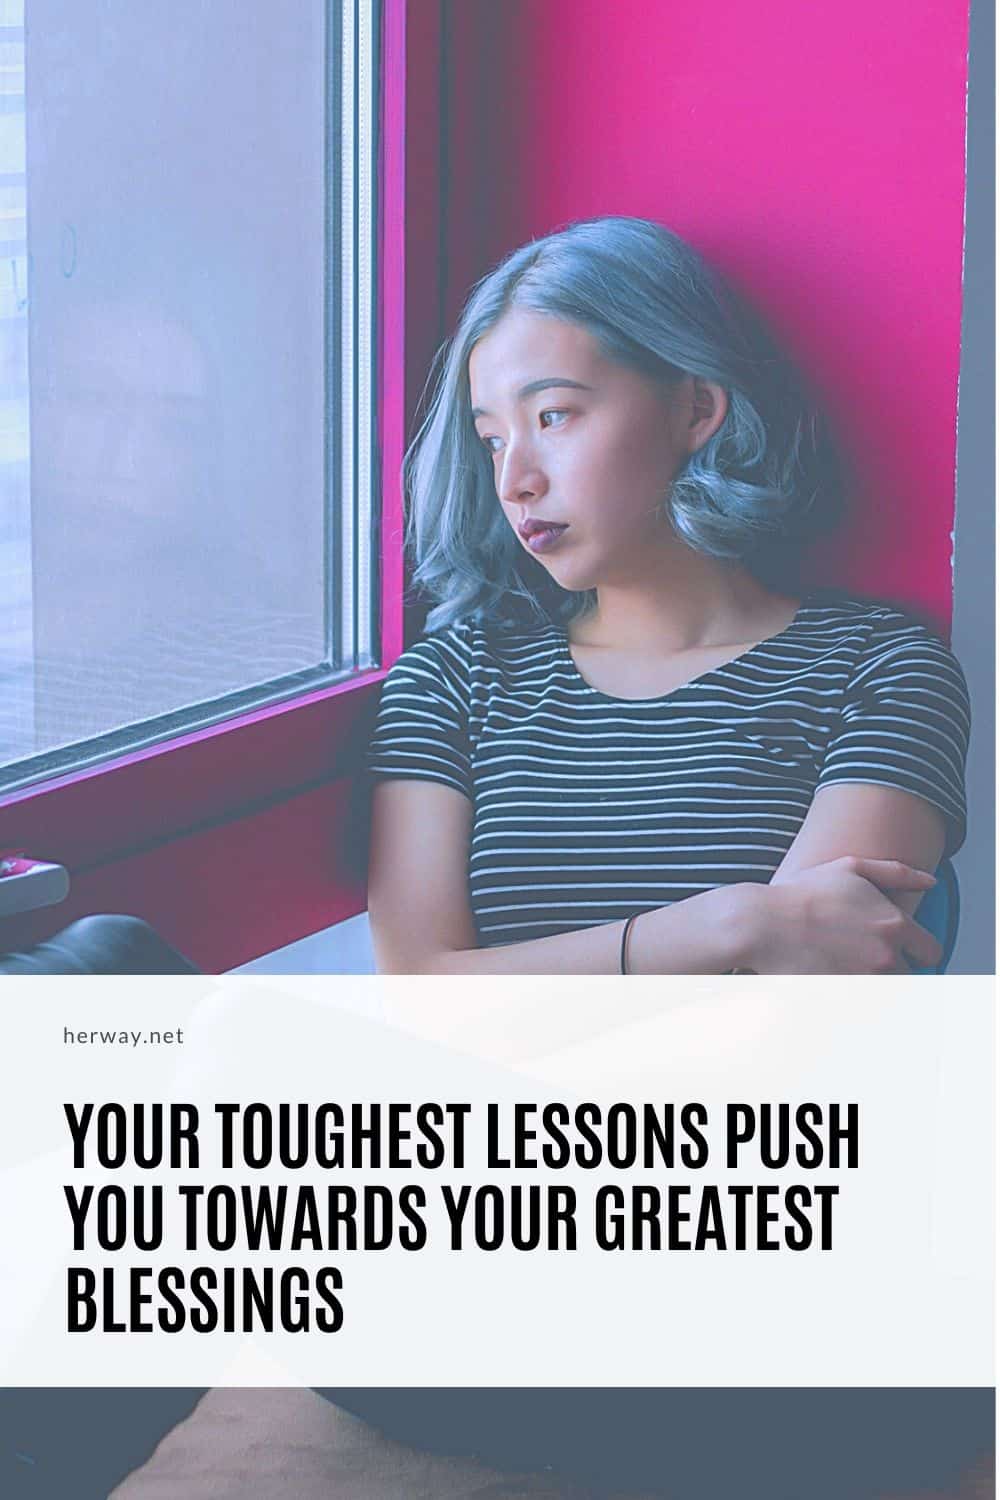 Your Toughest Lessons Push You Towards Your Greatest Blessings